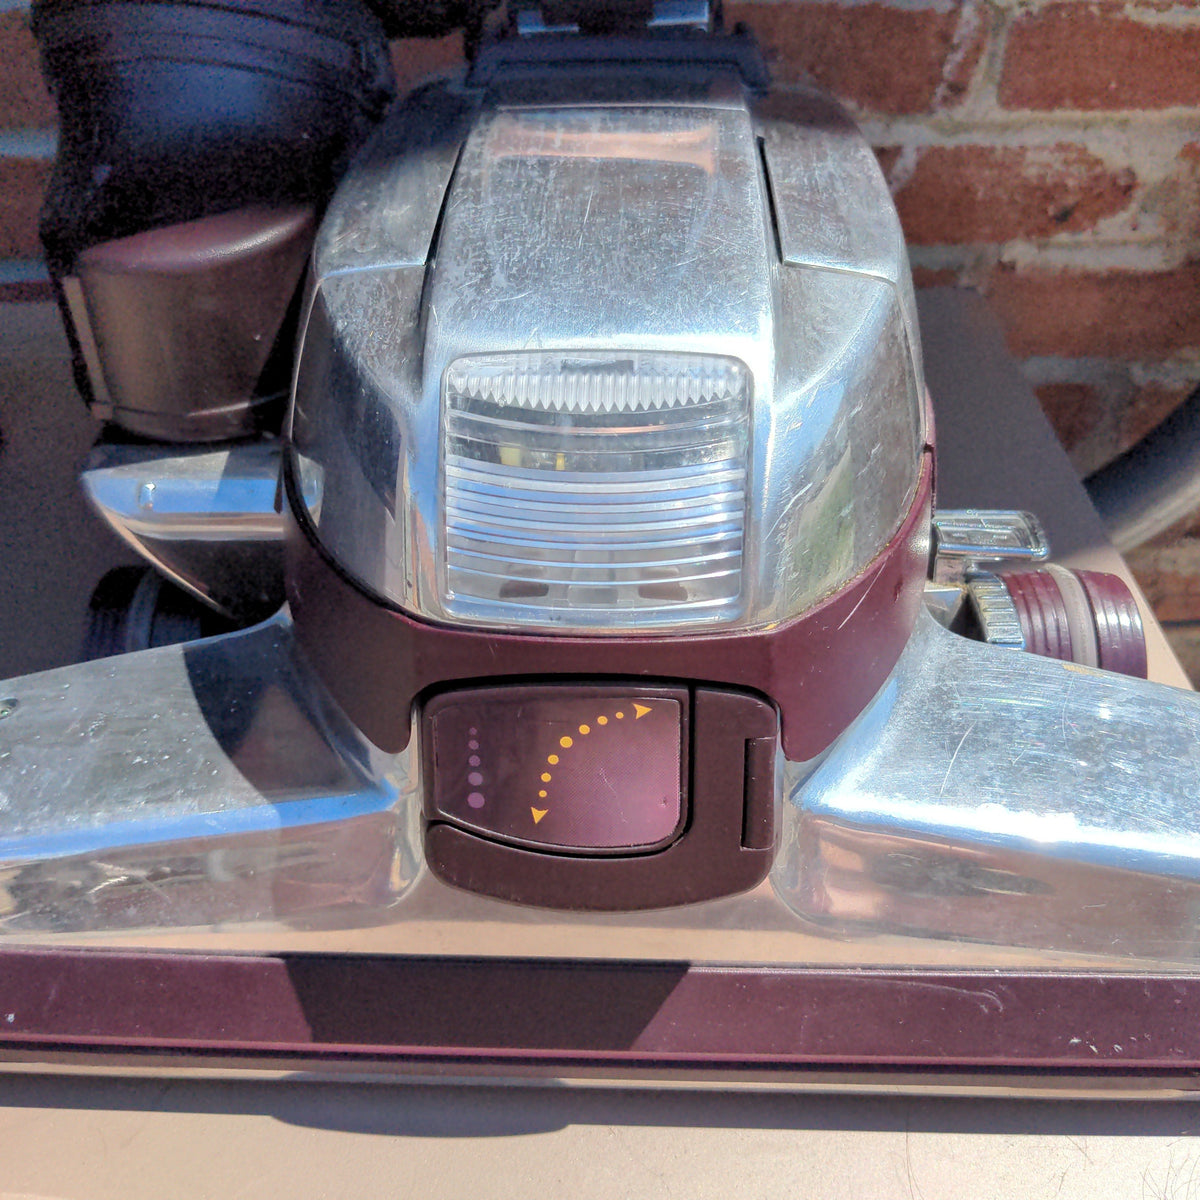 Kirby Kirby G5 - Reconditioned - MyVacuumPlace - Vacuums Etc